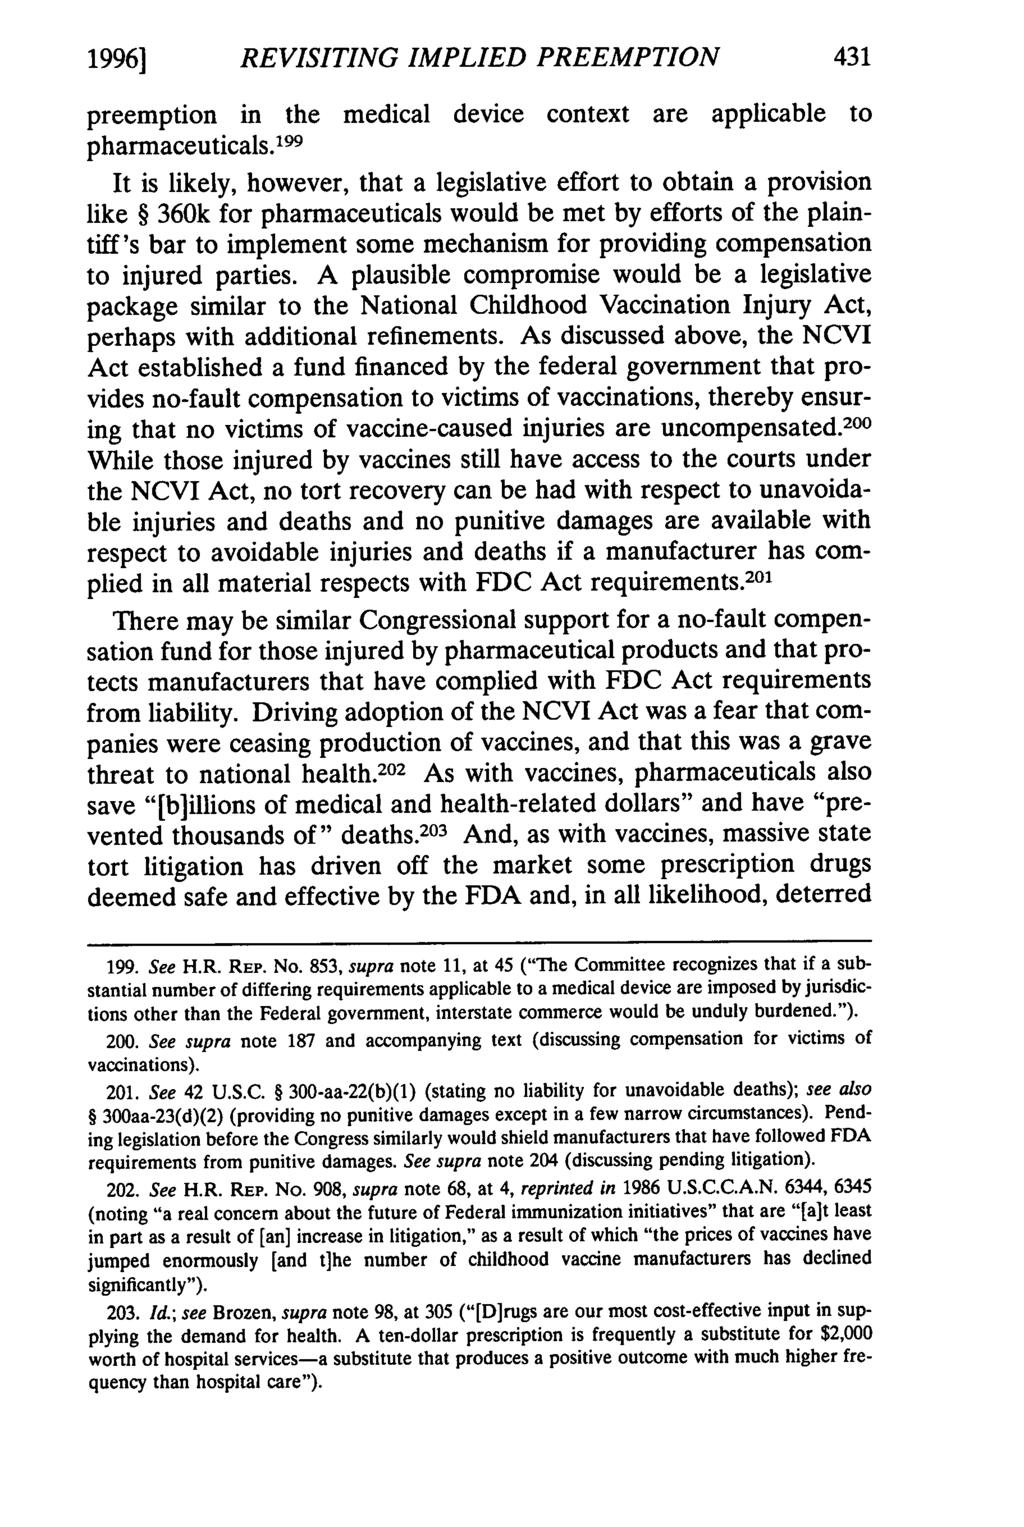 1996] REVISITING IMPLIED PREEMPTION preemption in the medical device context are applicable to pharmaceuticals.